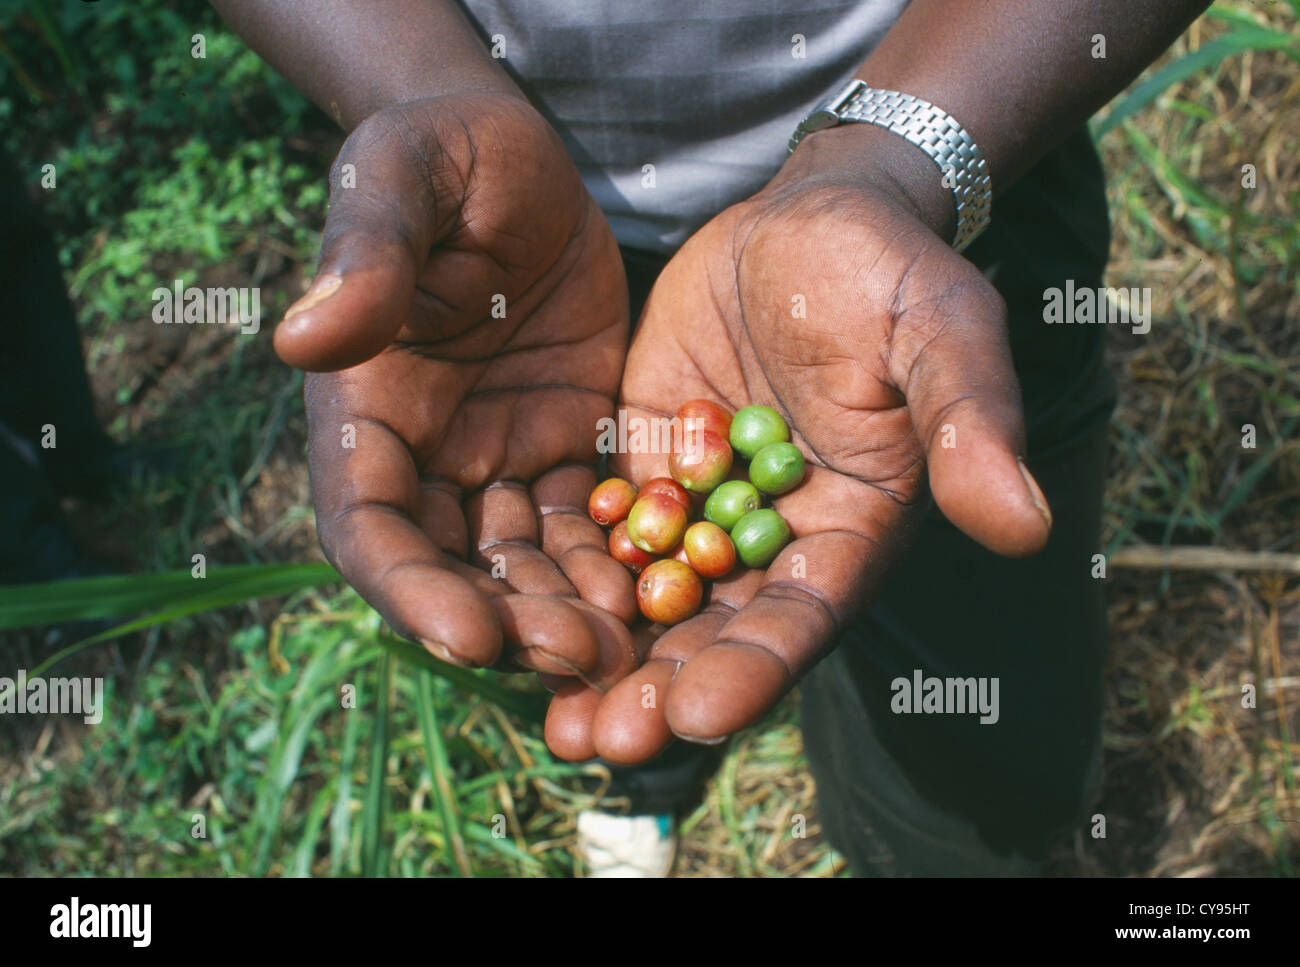 Africa, Kenya, Coffee arabica, Coffee, hands holding ripe harvested beans. Stock Photo